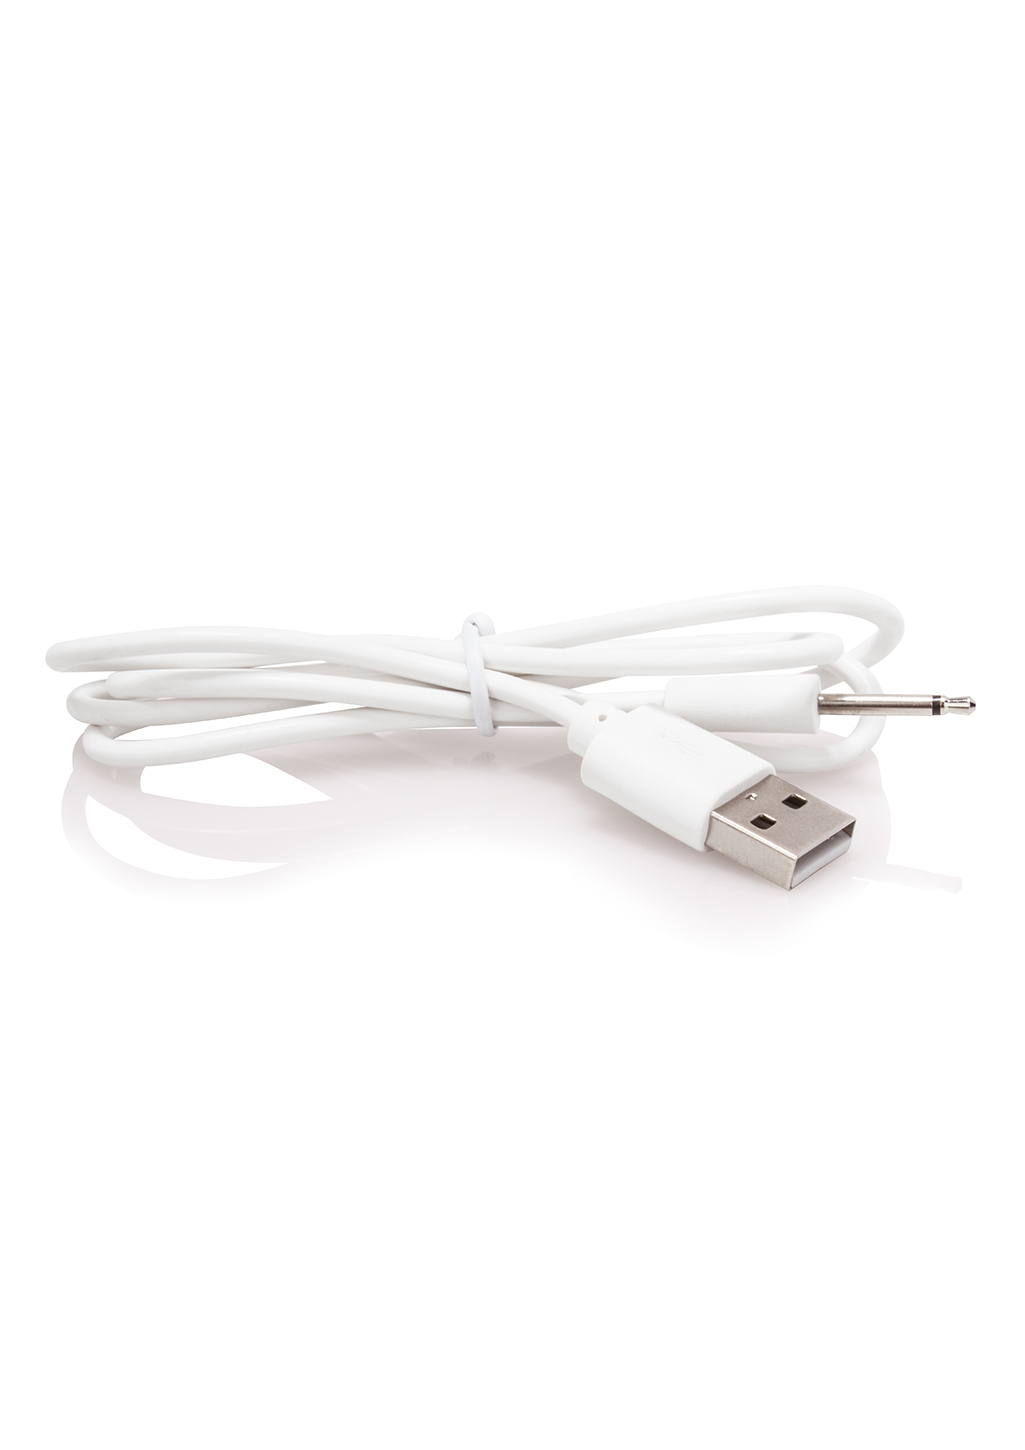 Recharge Charging Cable 2